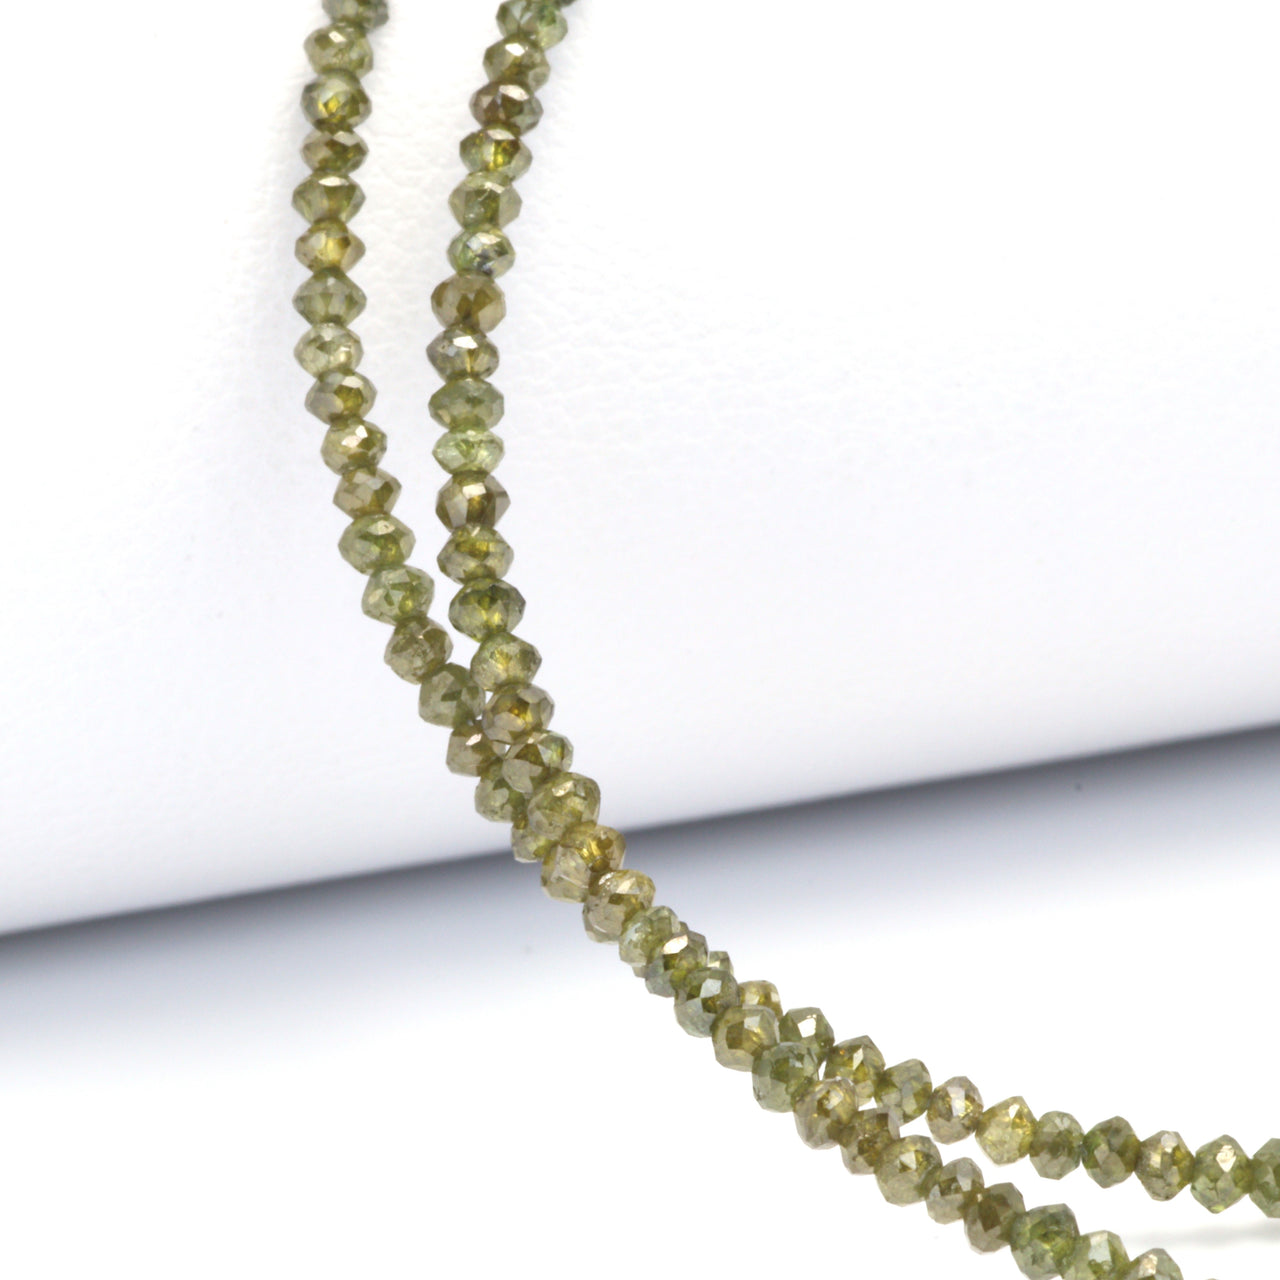 Green Diamond 1.8mm Faceted Rondelles